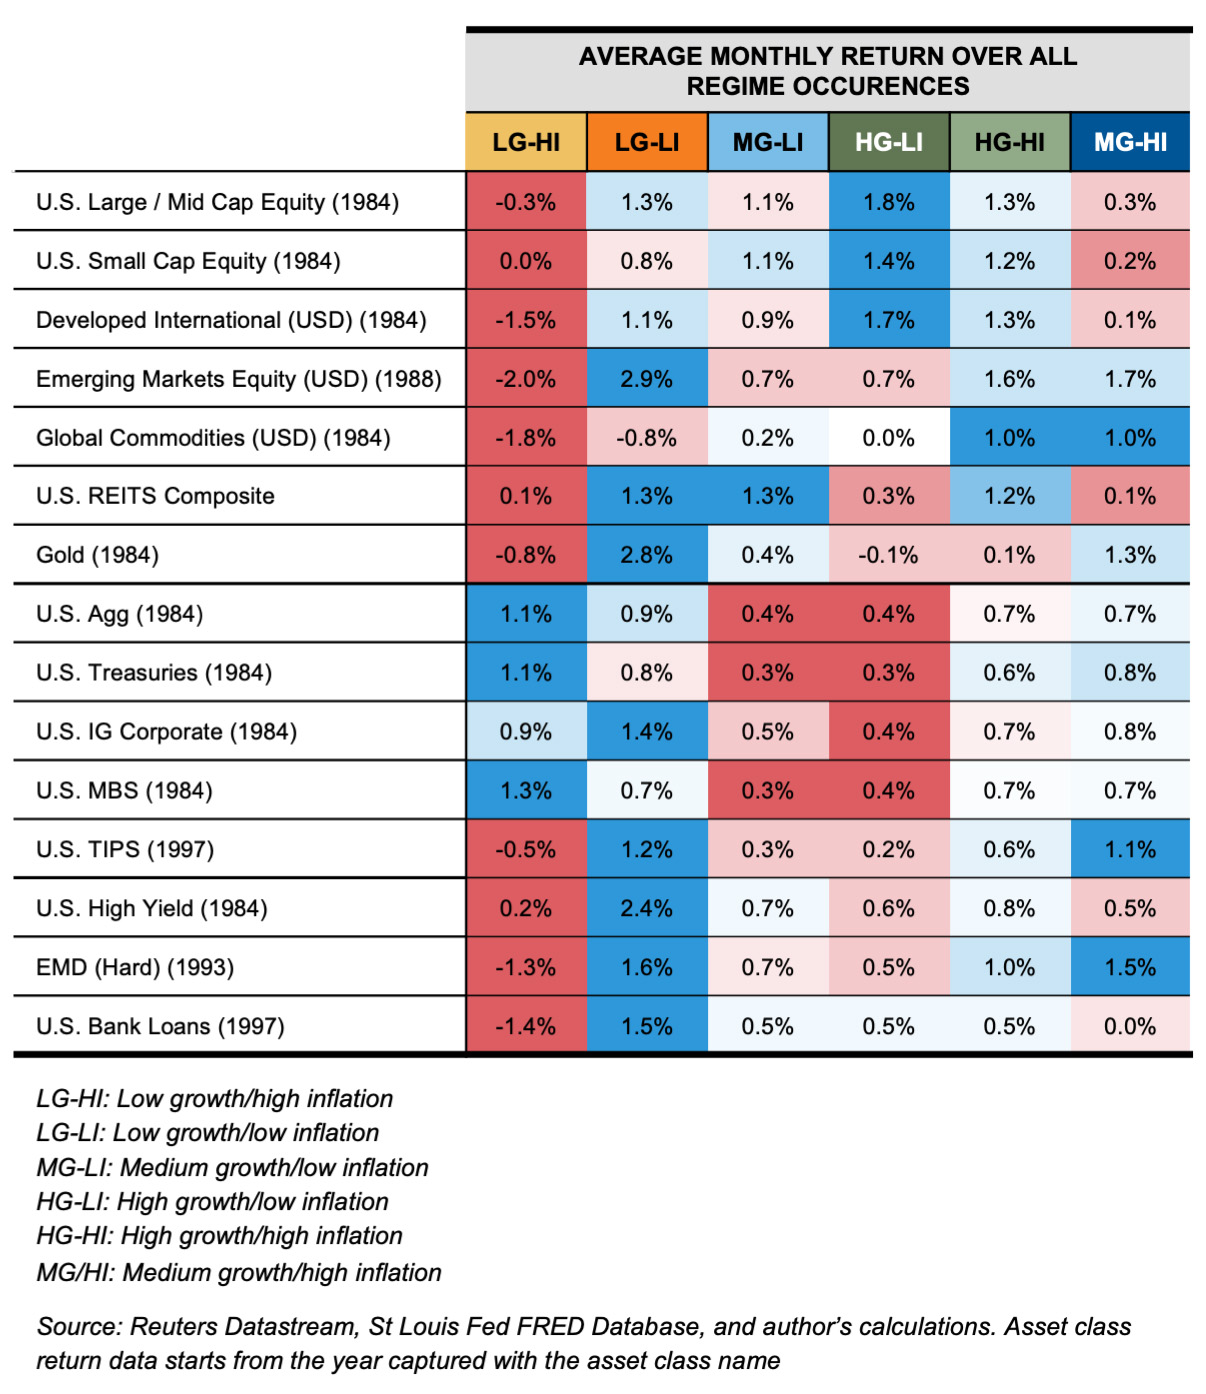 Monthly returns by asset class in different inflation environments